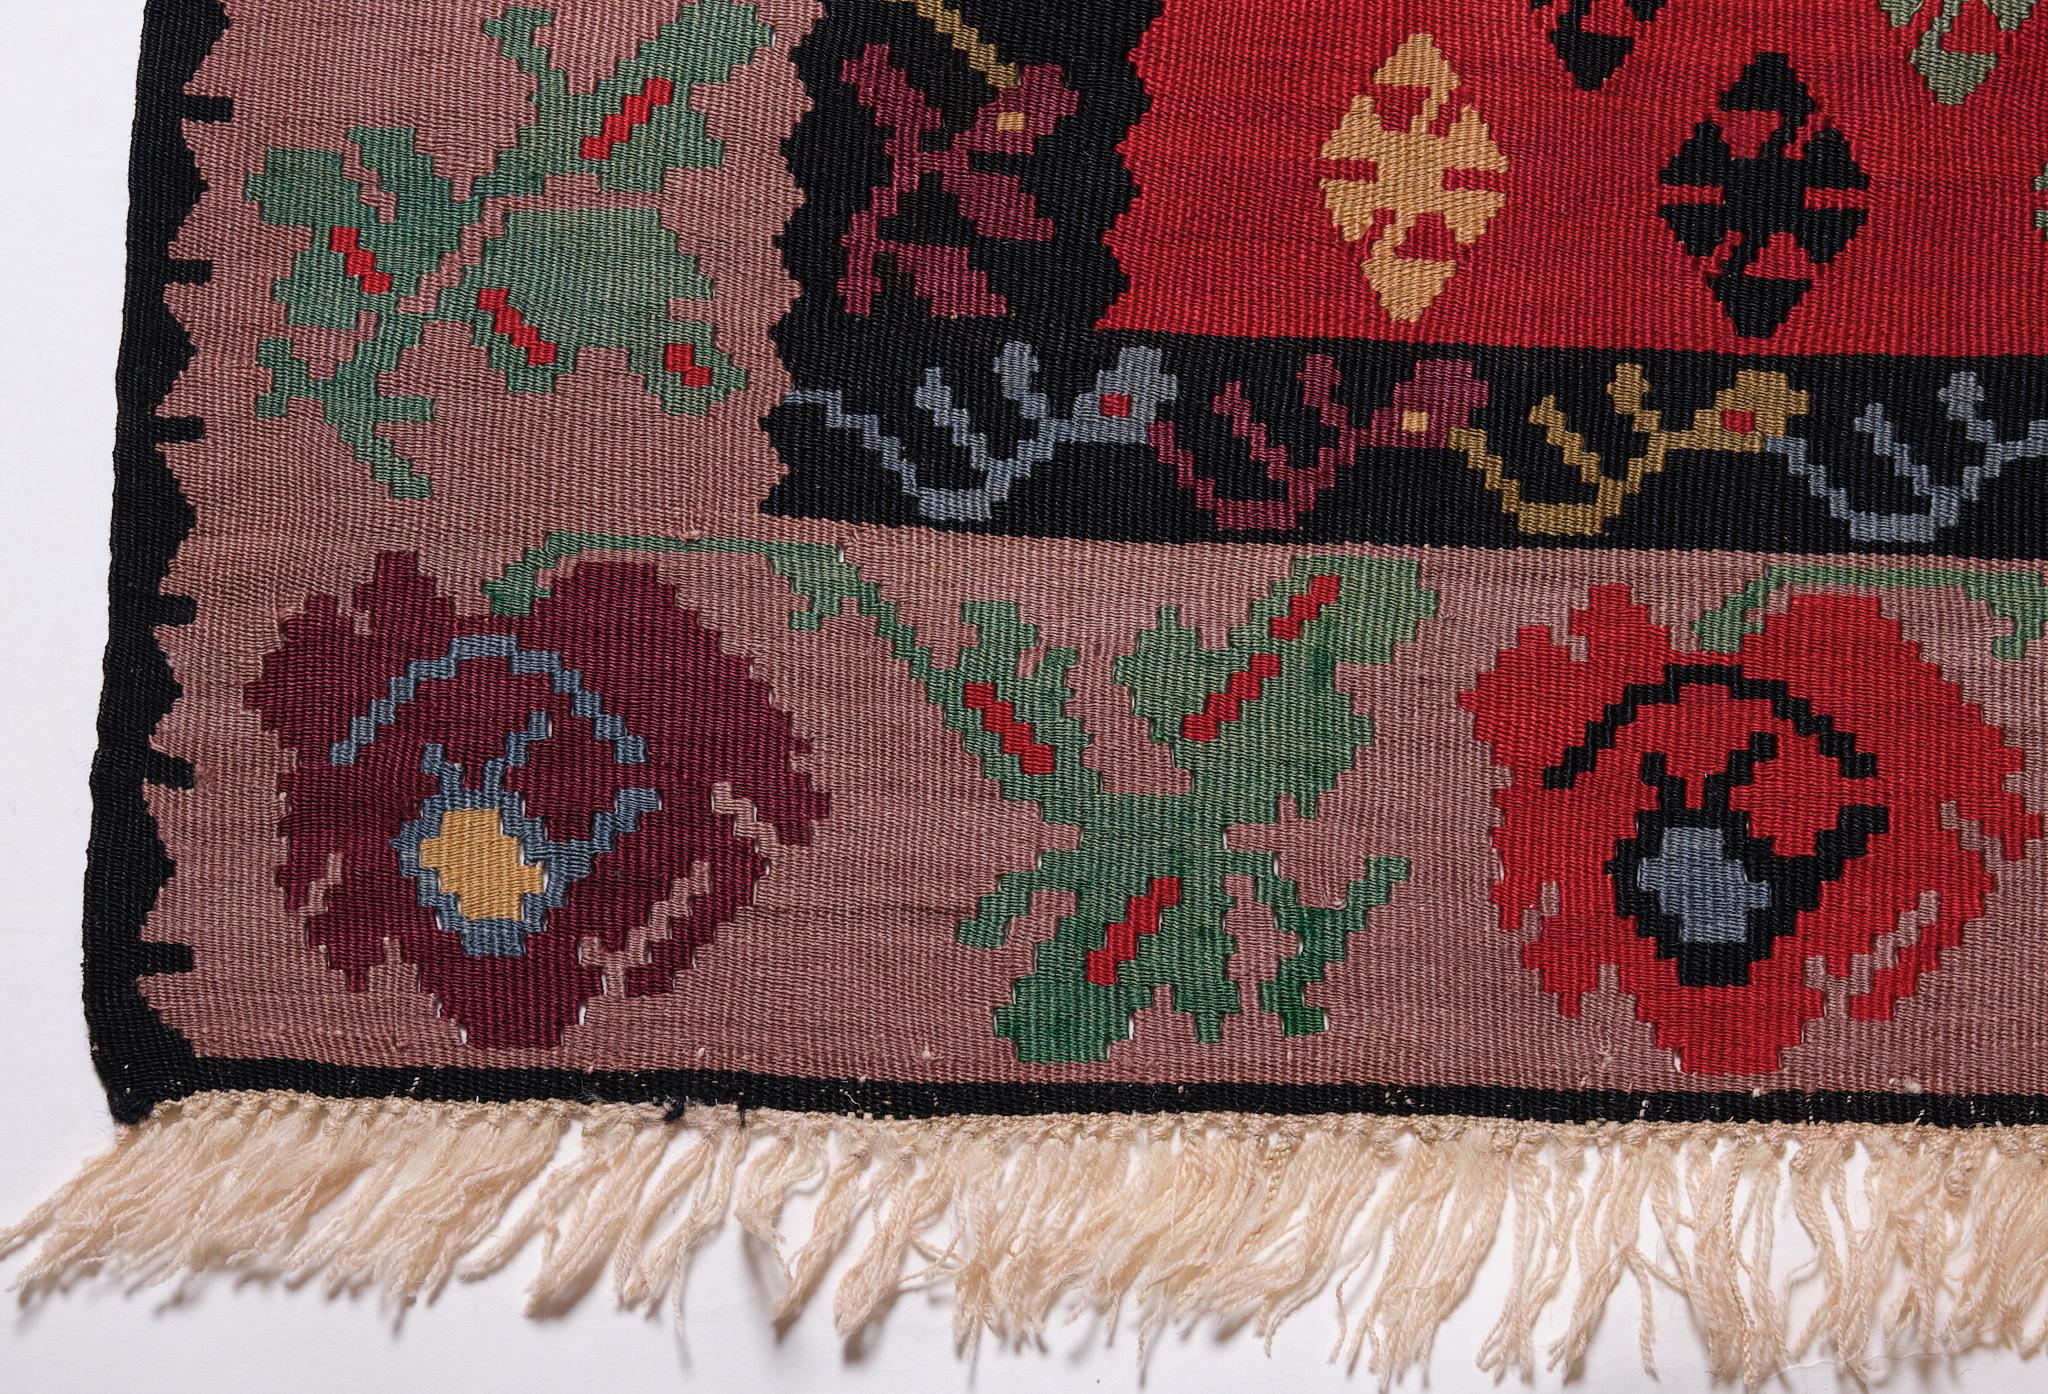 This is a vintage Old Sarkoy Kilim rug from Western Turkey with a rare and beautiful color composition.

Sarkoy kilims are very finely woven in slitweave in a variety of sizes and are made in one piece. Many feature the tree of life composition